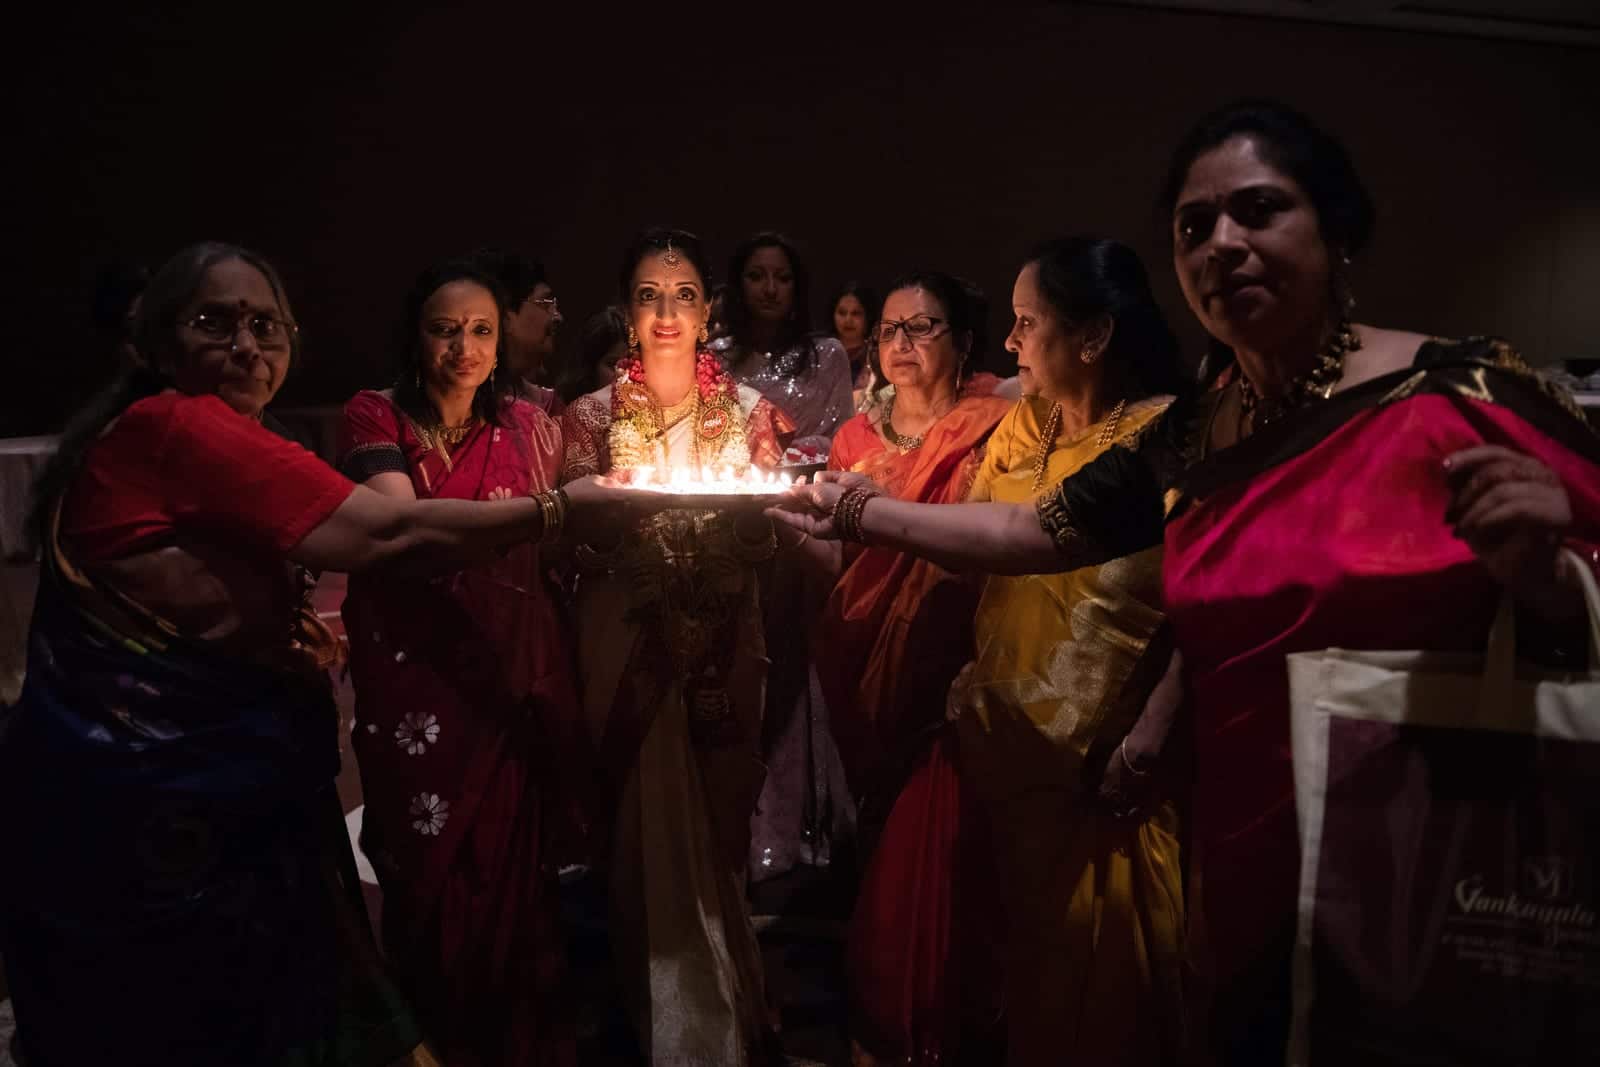 A south asian bride is illuminated by the tray of candles she holds while being escorted by a group of women wearing saris during her wedding at the Wyndham Grand hotel in Pittsburgh.